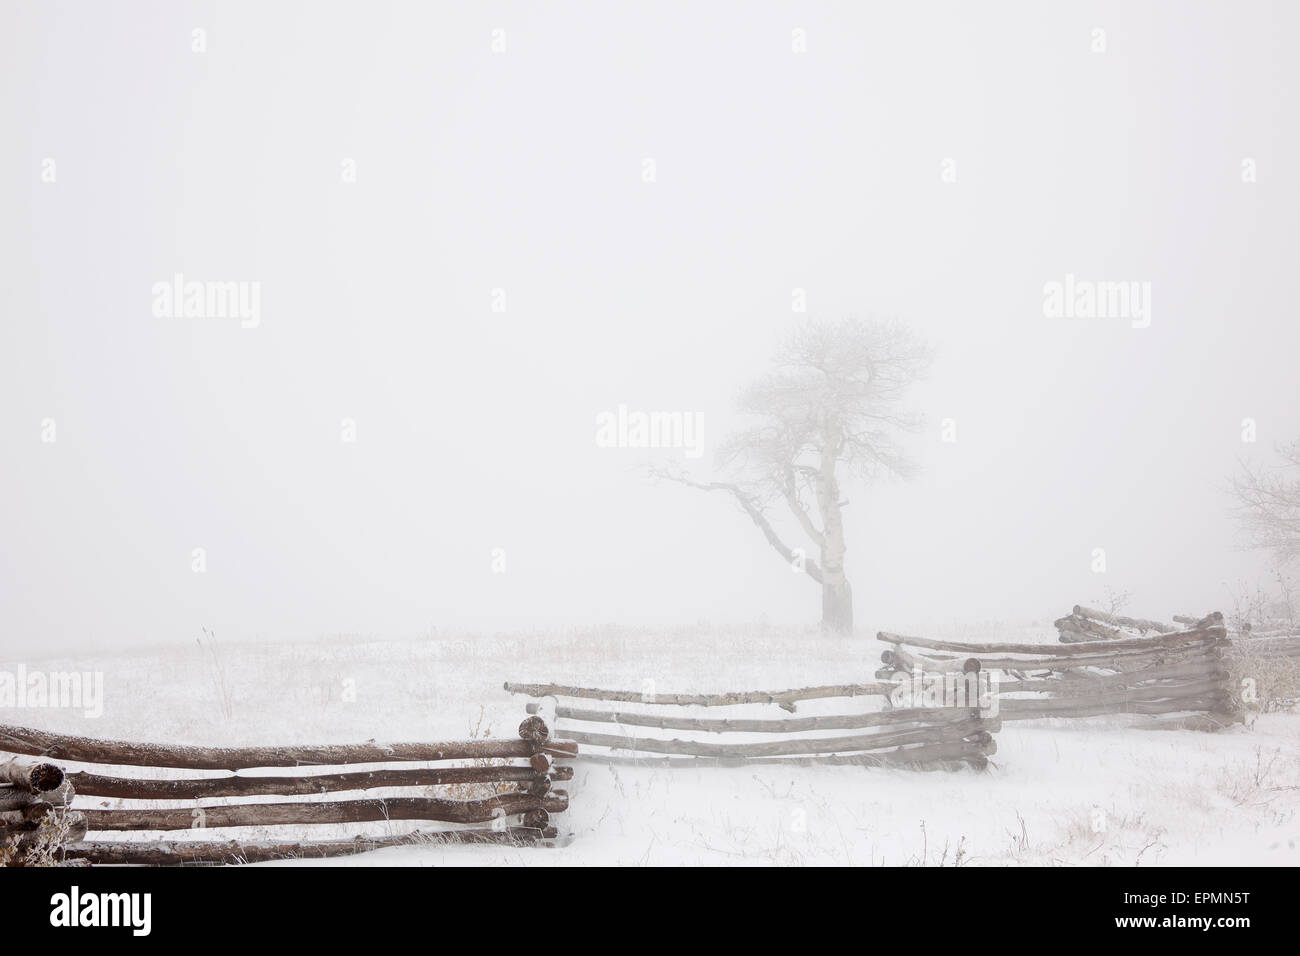 A cold winter's day, with white sky and snow on the ground. Mist obscuring trees. Stock Photo